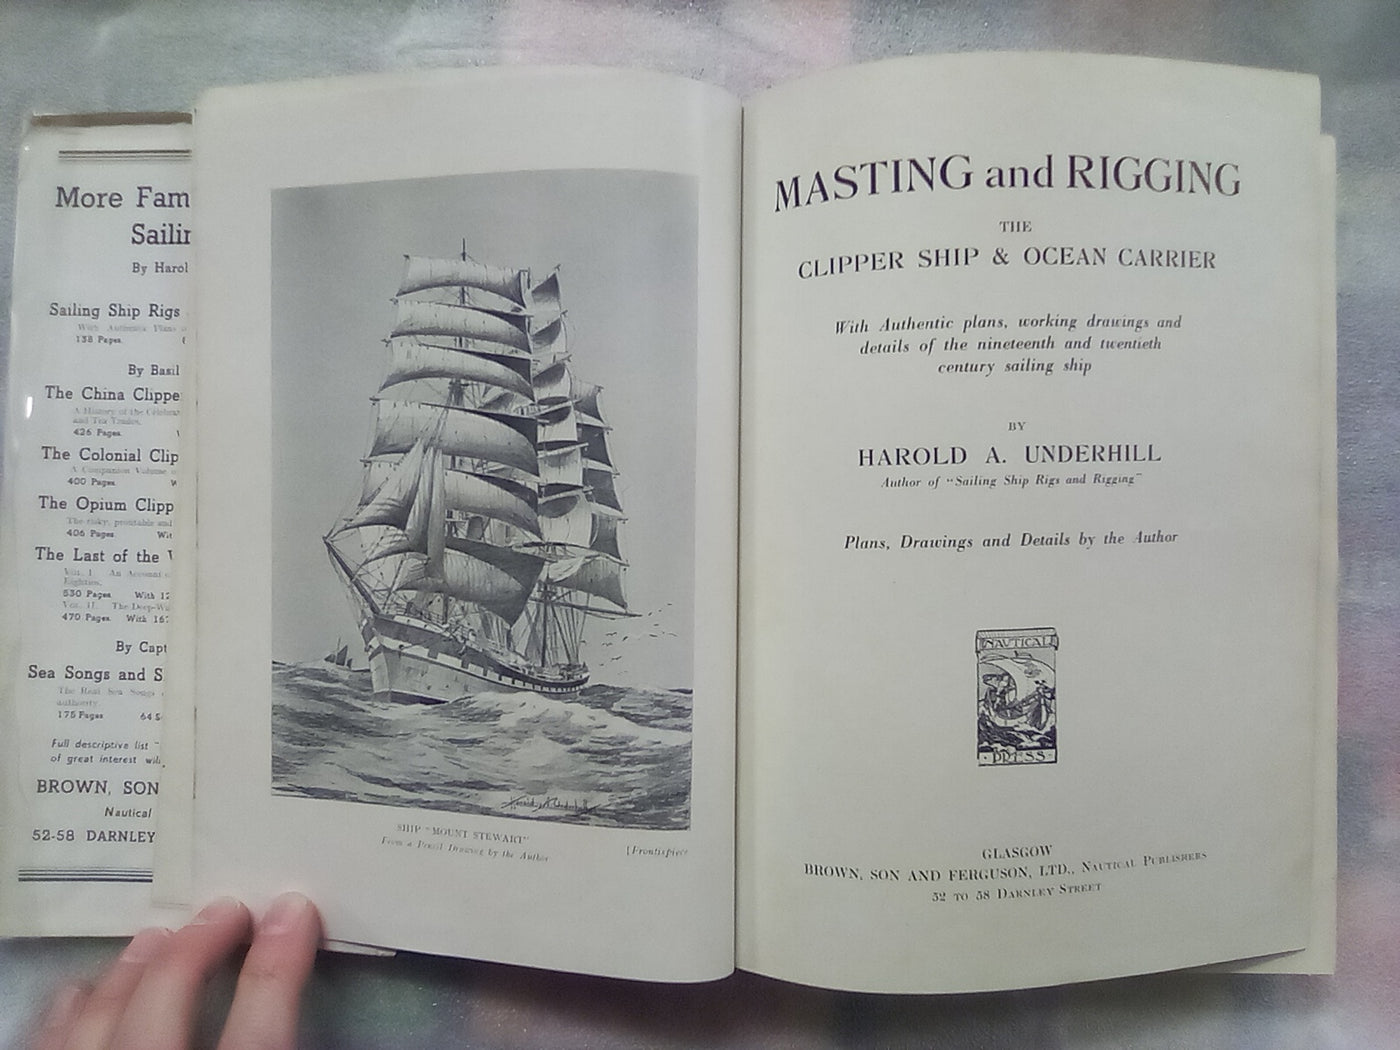 Masting & Rigging - the Clipper Ship & Ocean Carrier (1949) by H.A. Underhill